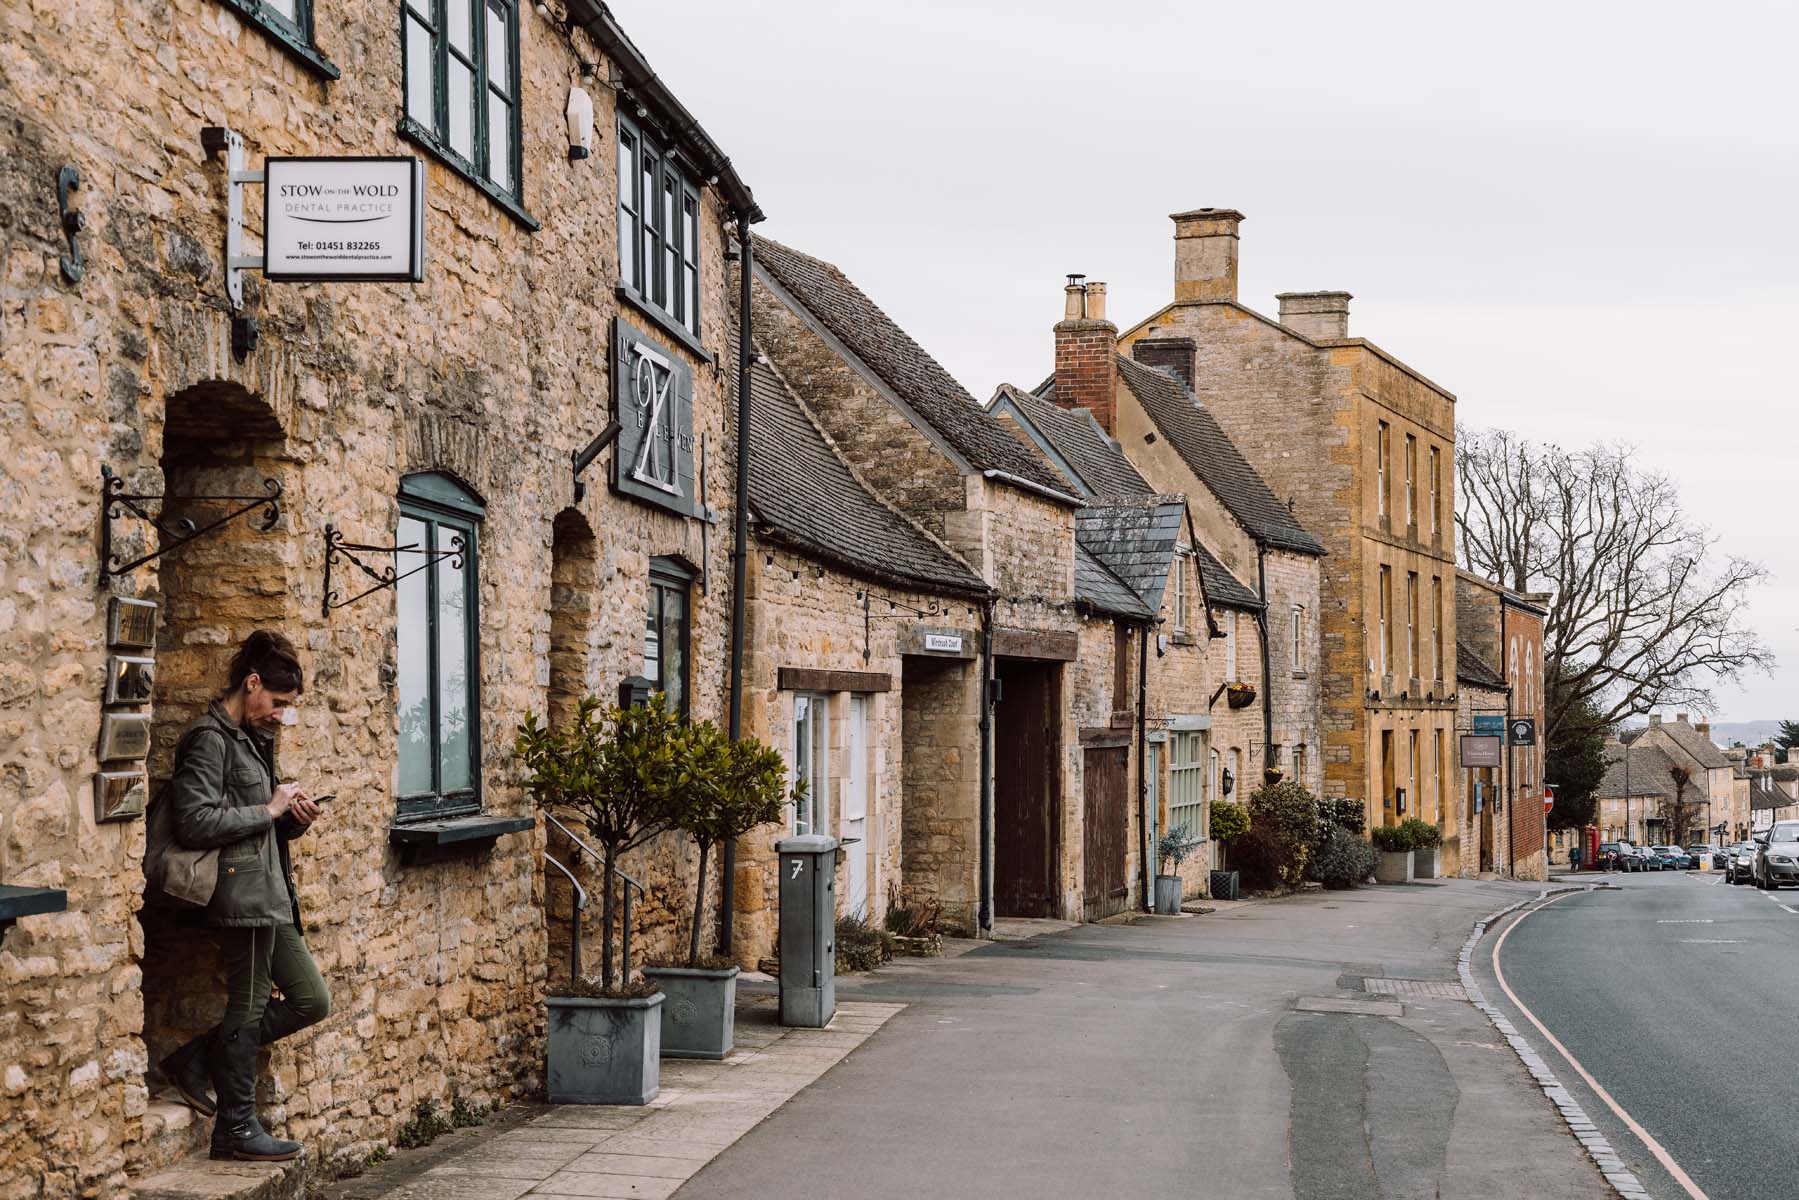 Cotswold stone village Stow on the wold